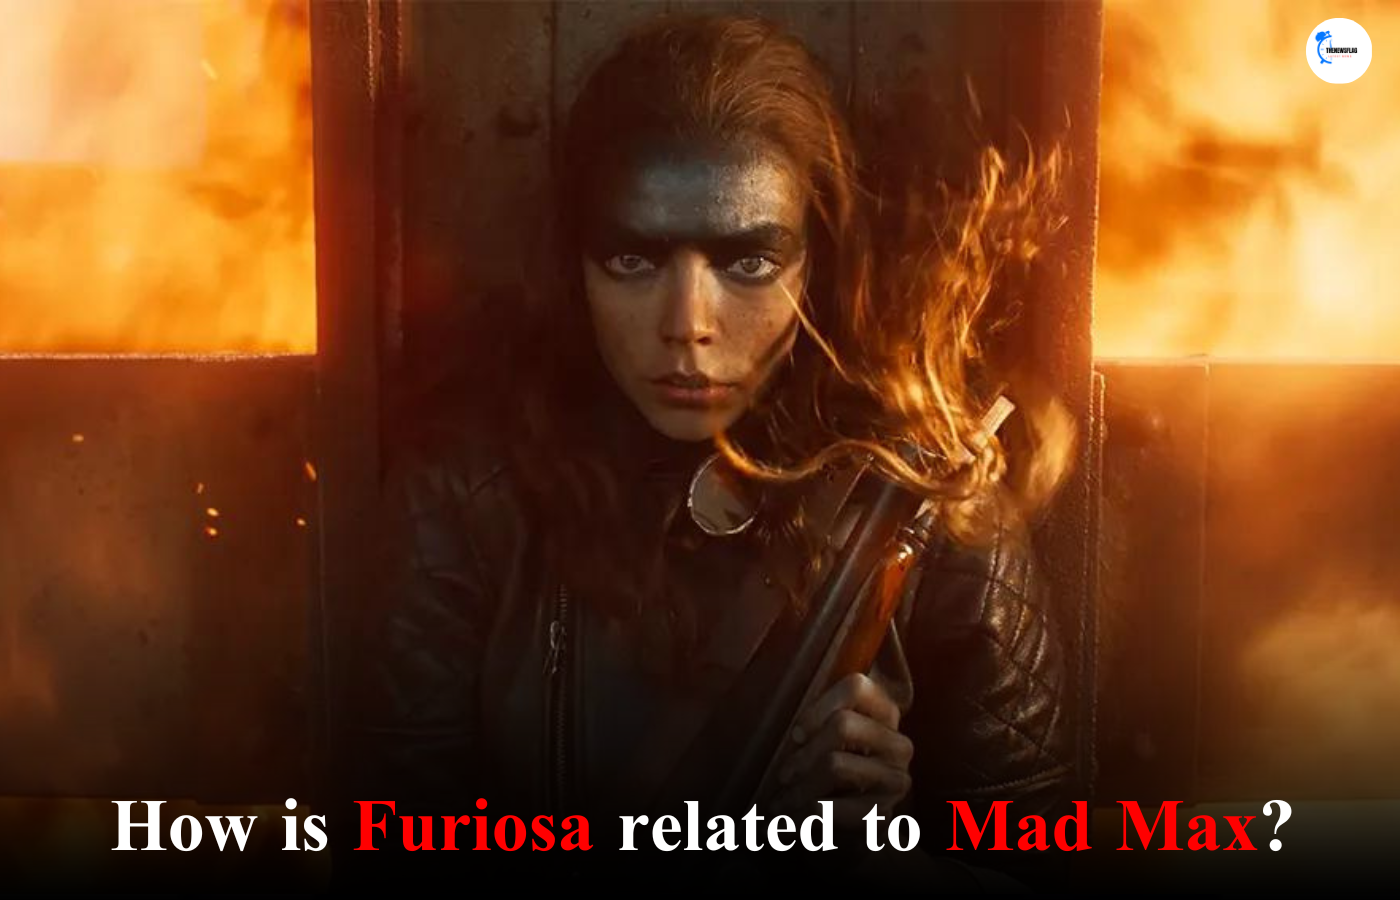 Frousia: A Mad Max Is Not "Fury Road" Review